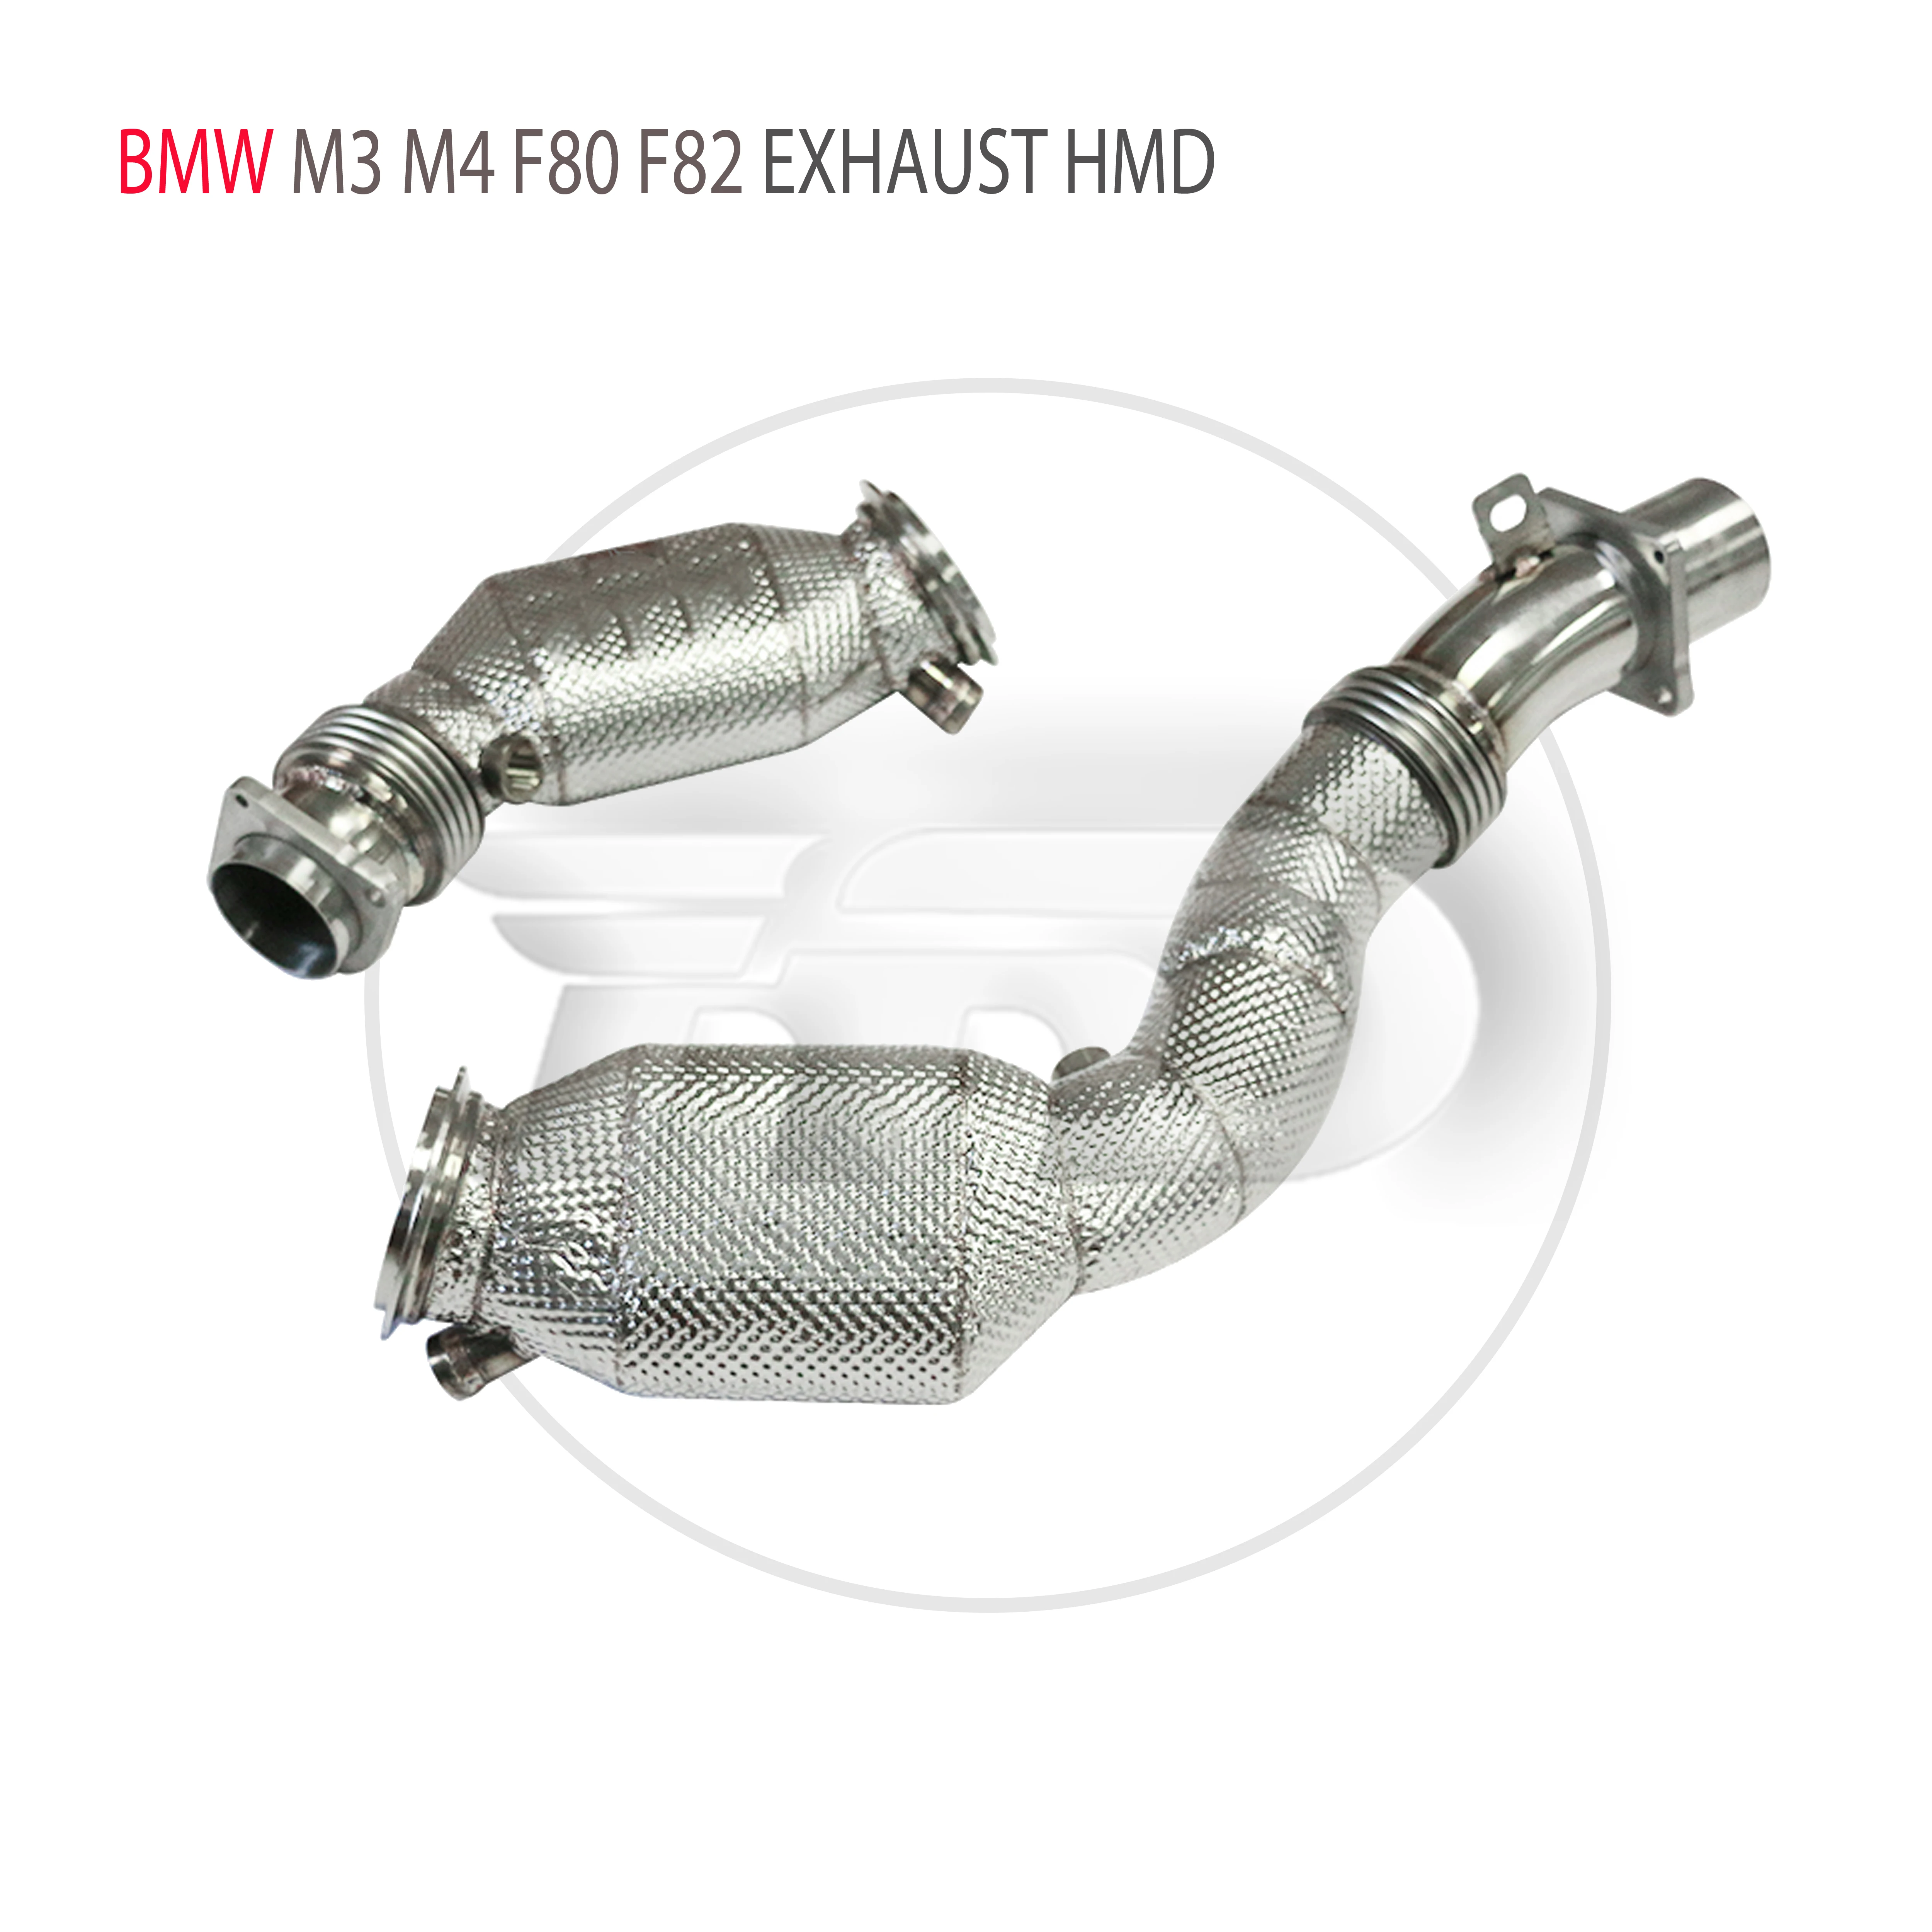 

HMD Exhaust Assembly High Flow Performance Downpipe for BMW M3 M4 F80 F82 S55 Engine 3.0T Car Accessories Catalytic Converter